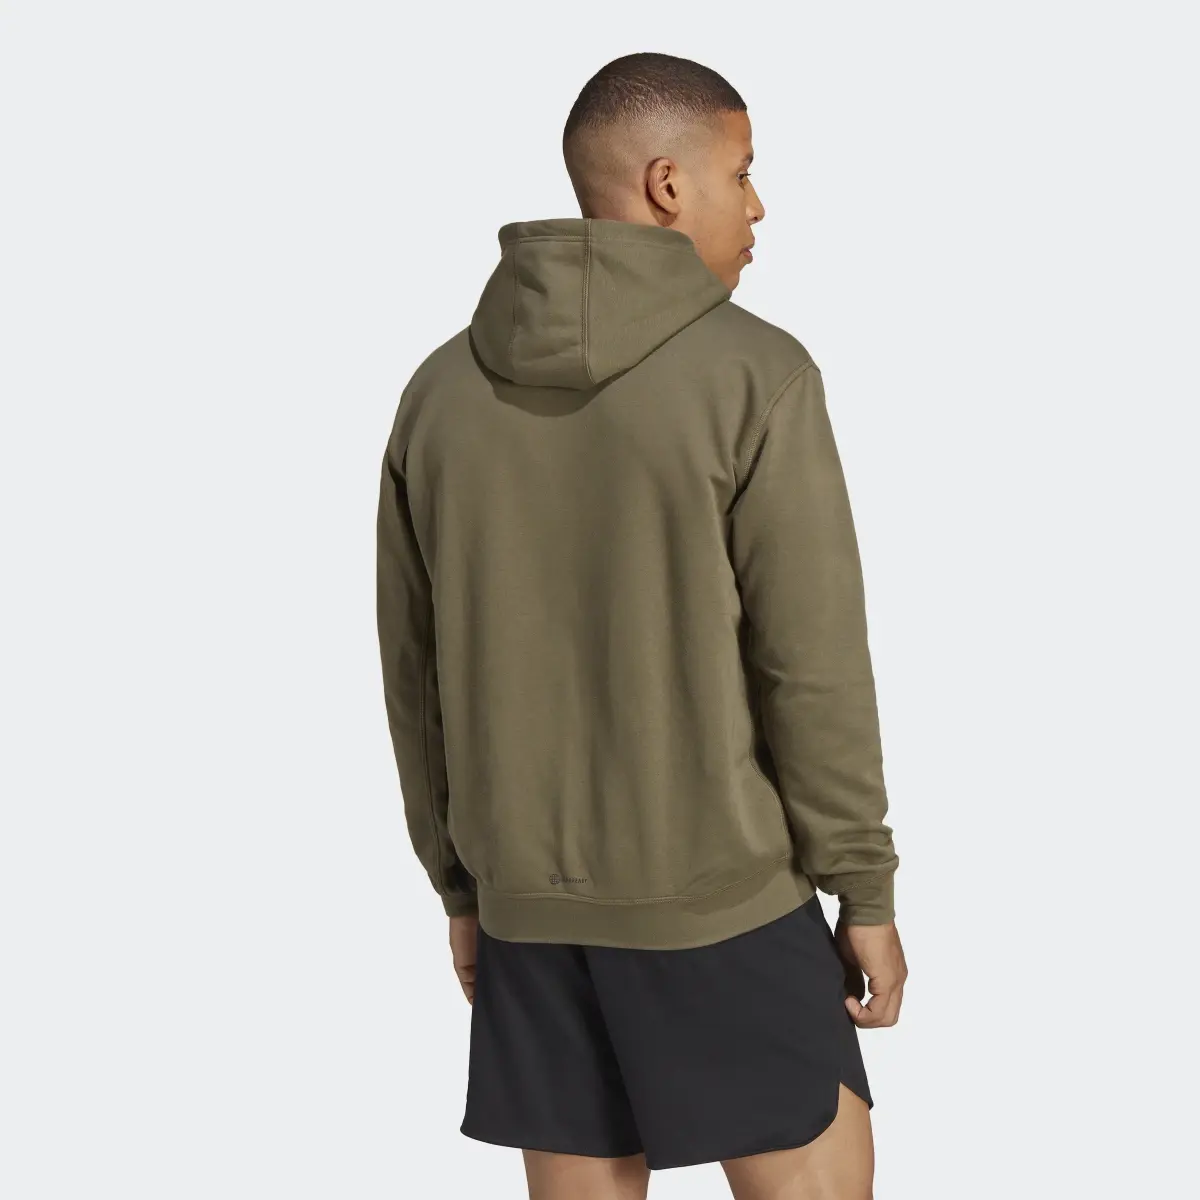 Adidas HIIT Hoodie Curated By Cody Rigsby. 3